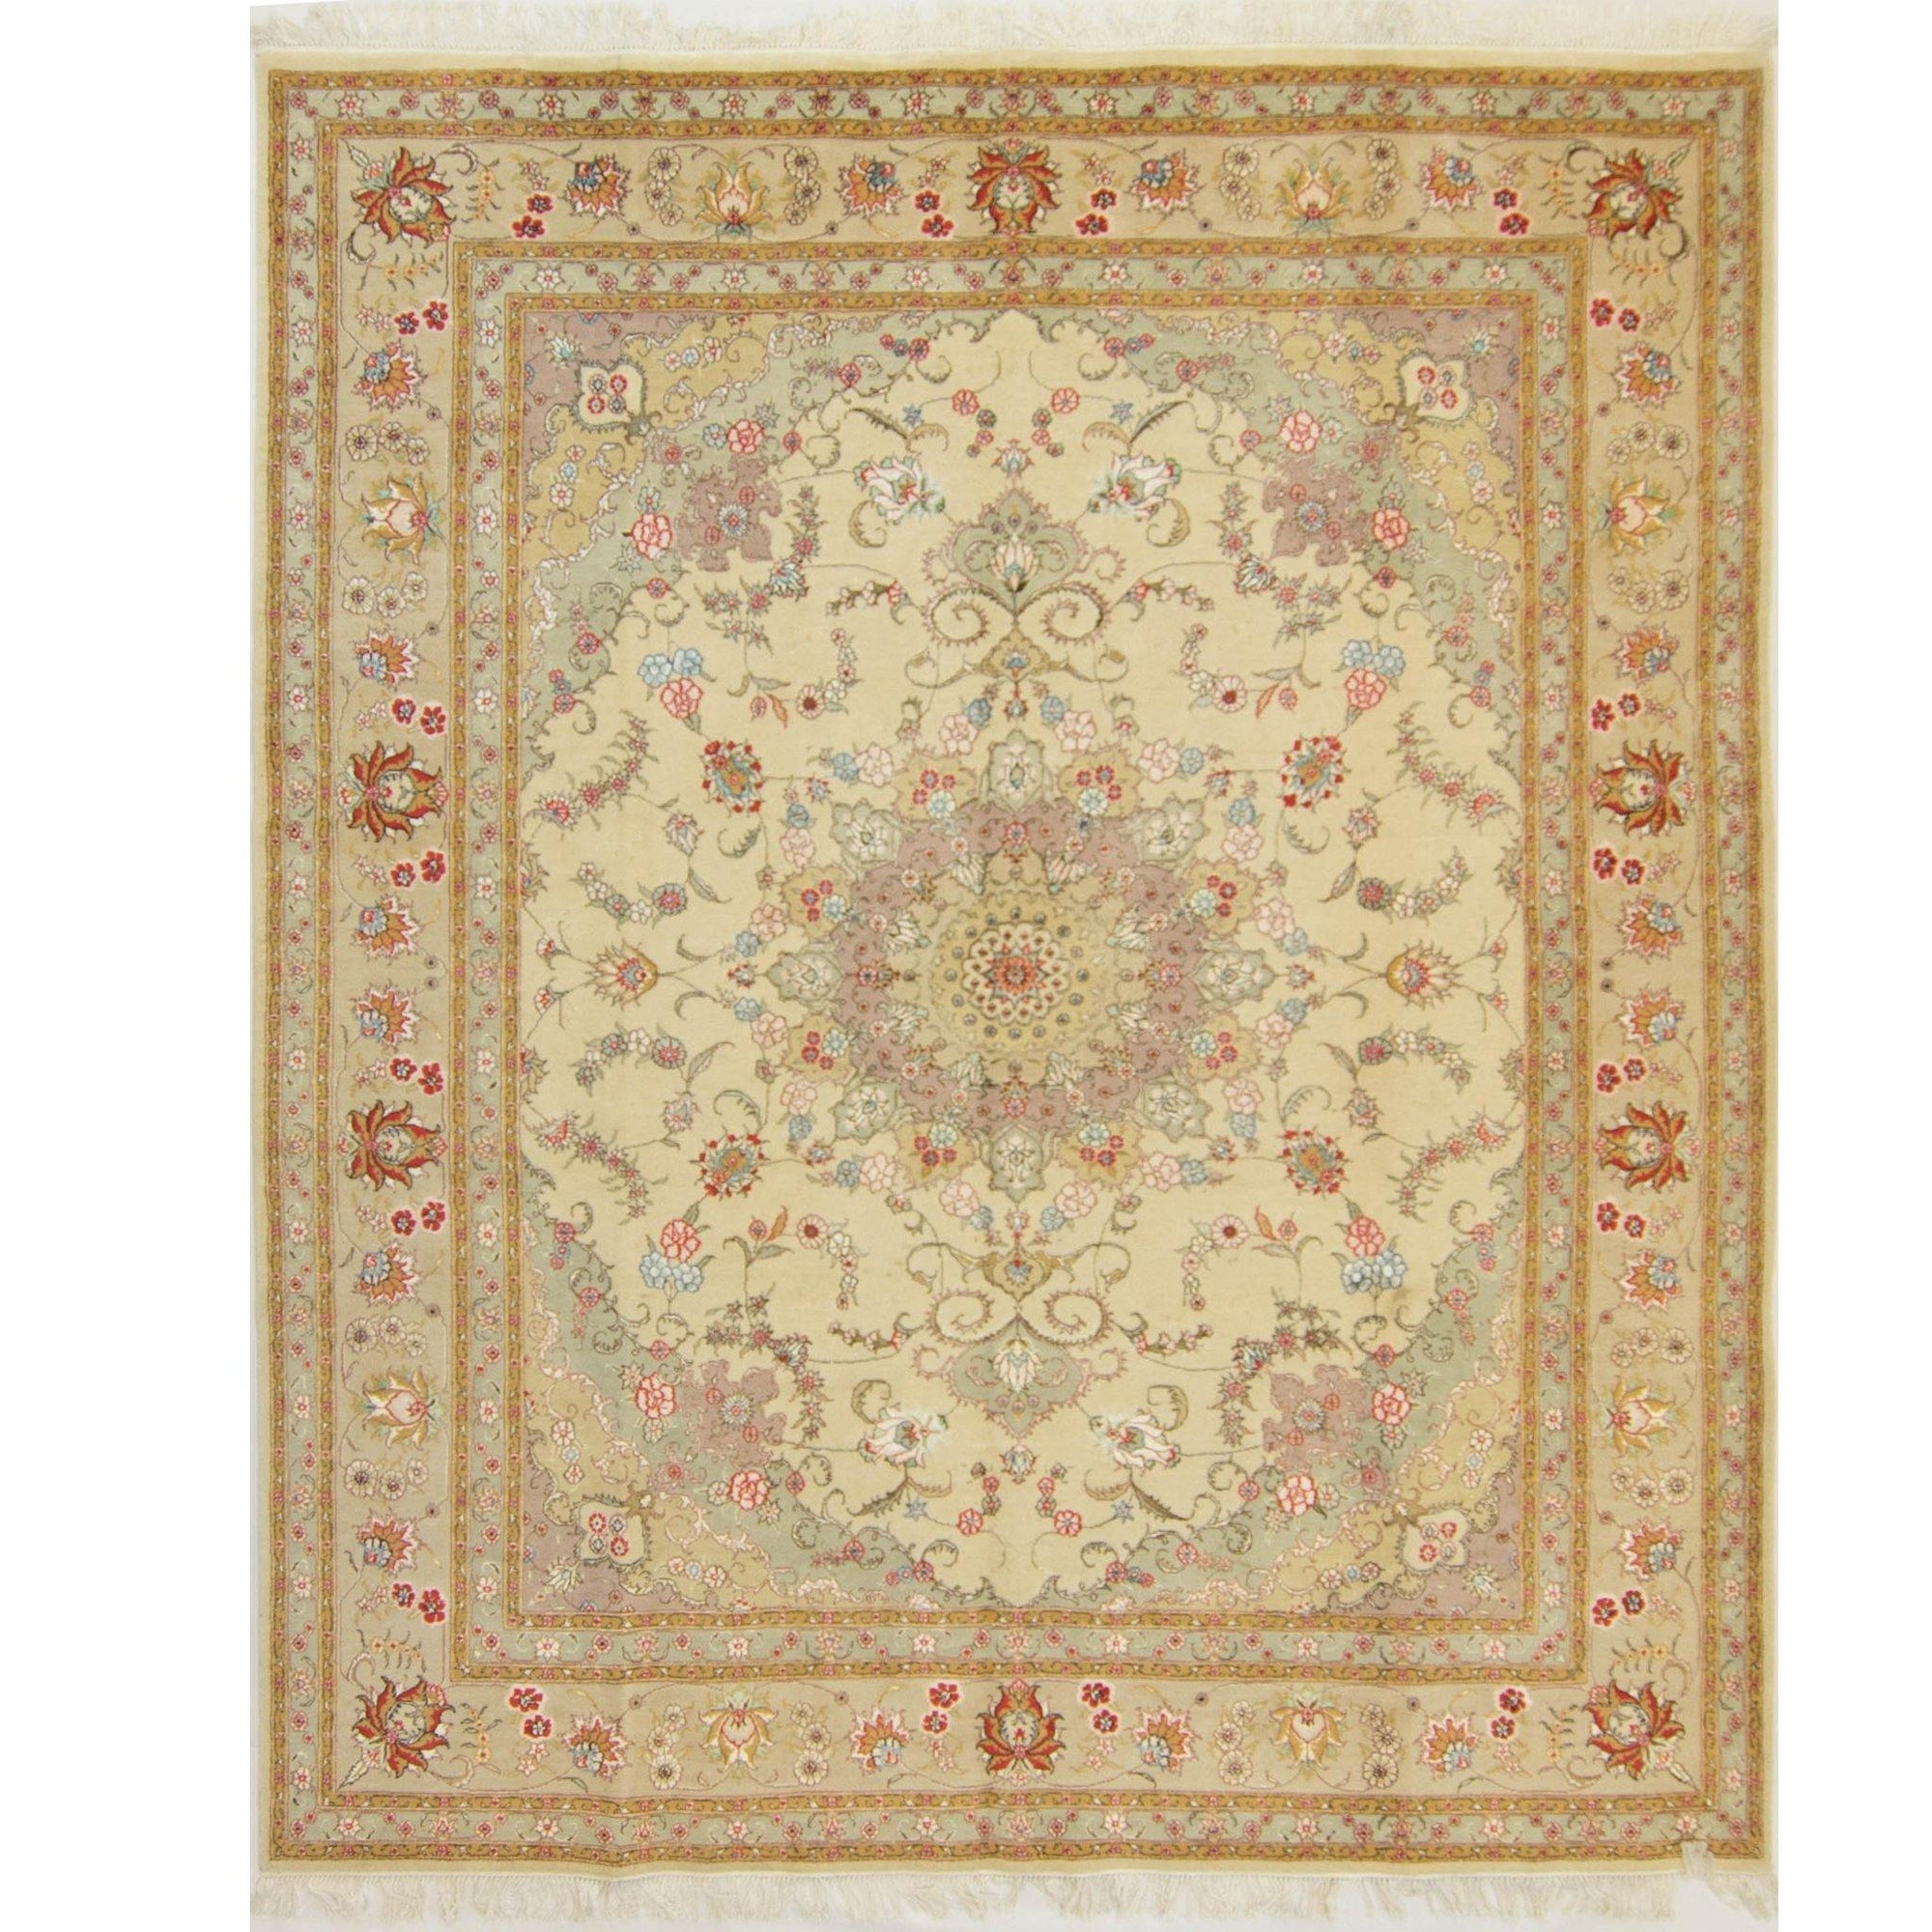 Fine Hand-knotted Persian Tabriz Rug 244cm x 305cm